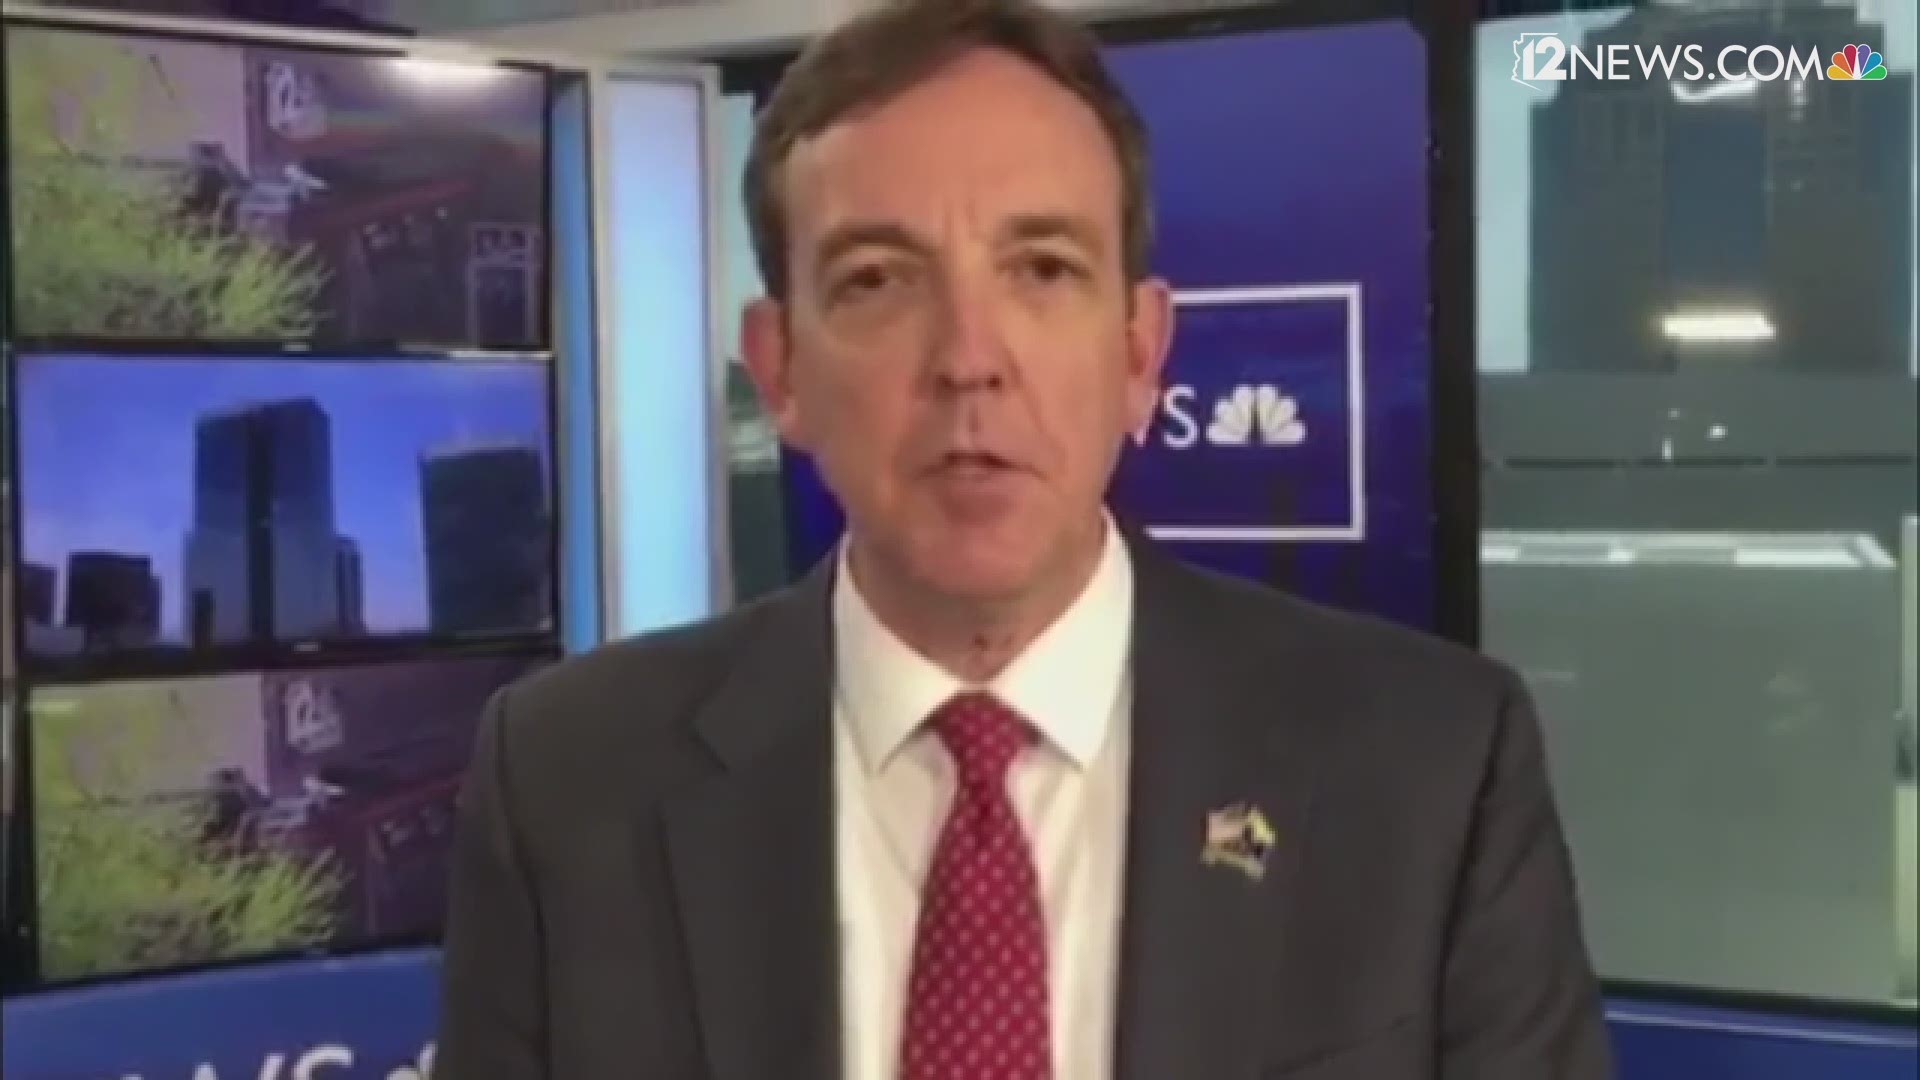 Former Secretary of State Ken Bennett tells 12 News' Brahm Resnik why he's challenging Gov. Doug Ducey in the Republican primary for governor.